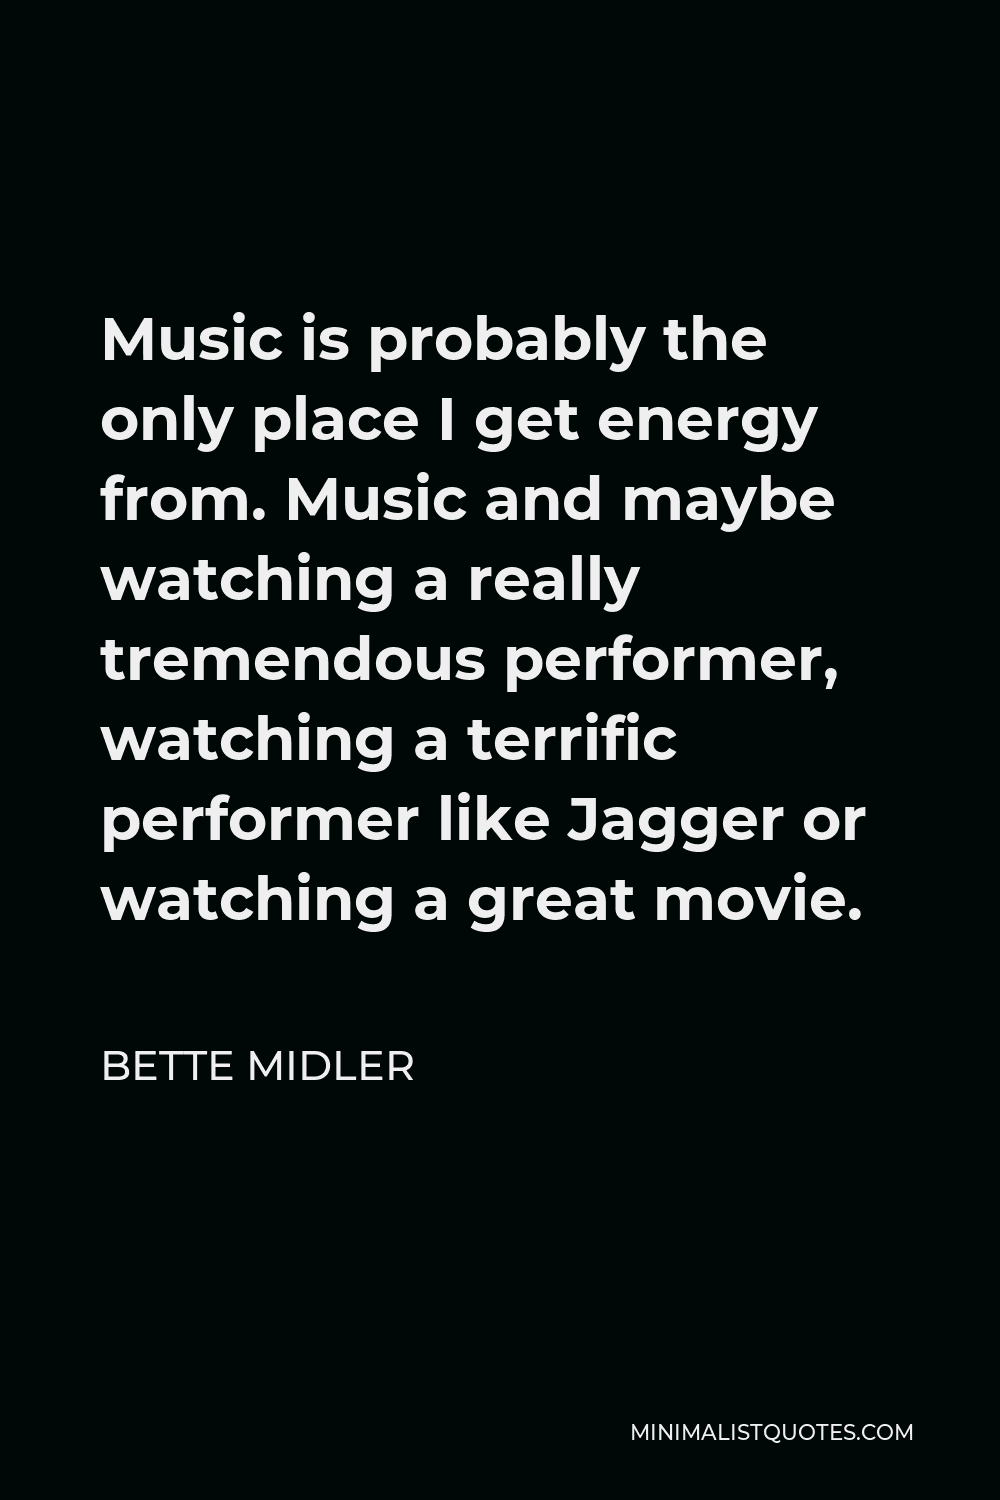 Bette Midler Quote - Music is probably the only place I get energy from. Music and maybe watching a really tremendous performer, watching a terrific performer like Jagger or watching a great movie.